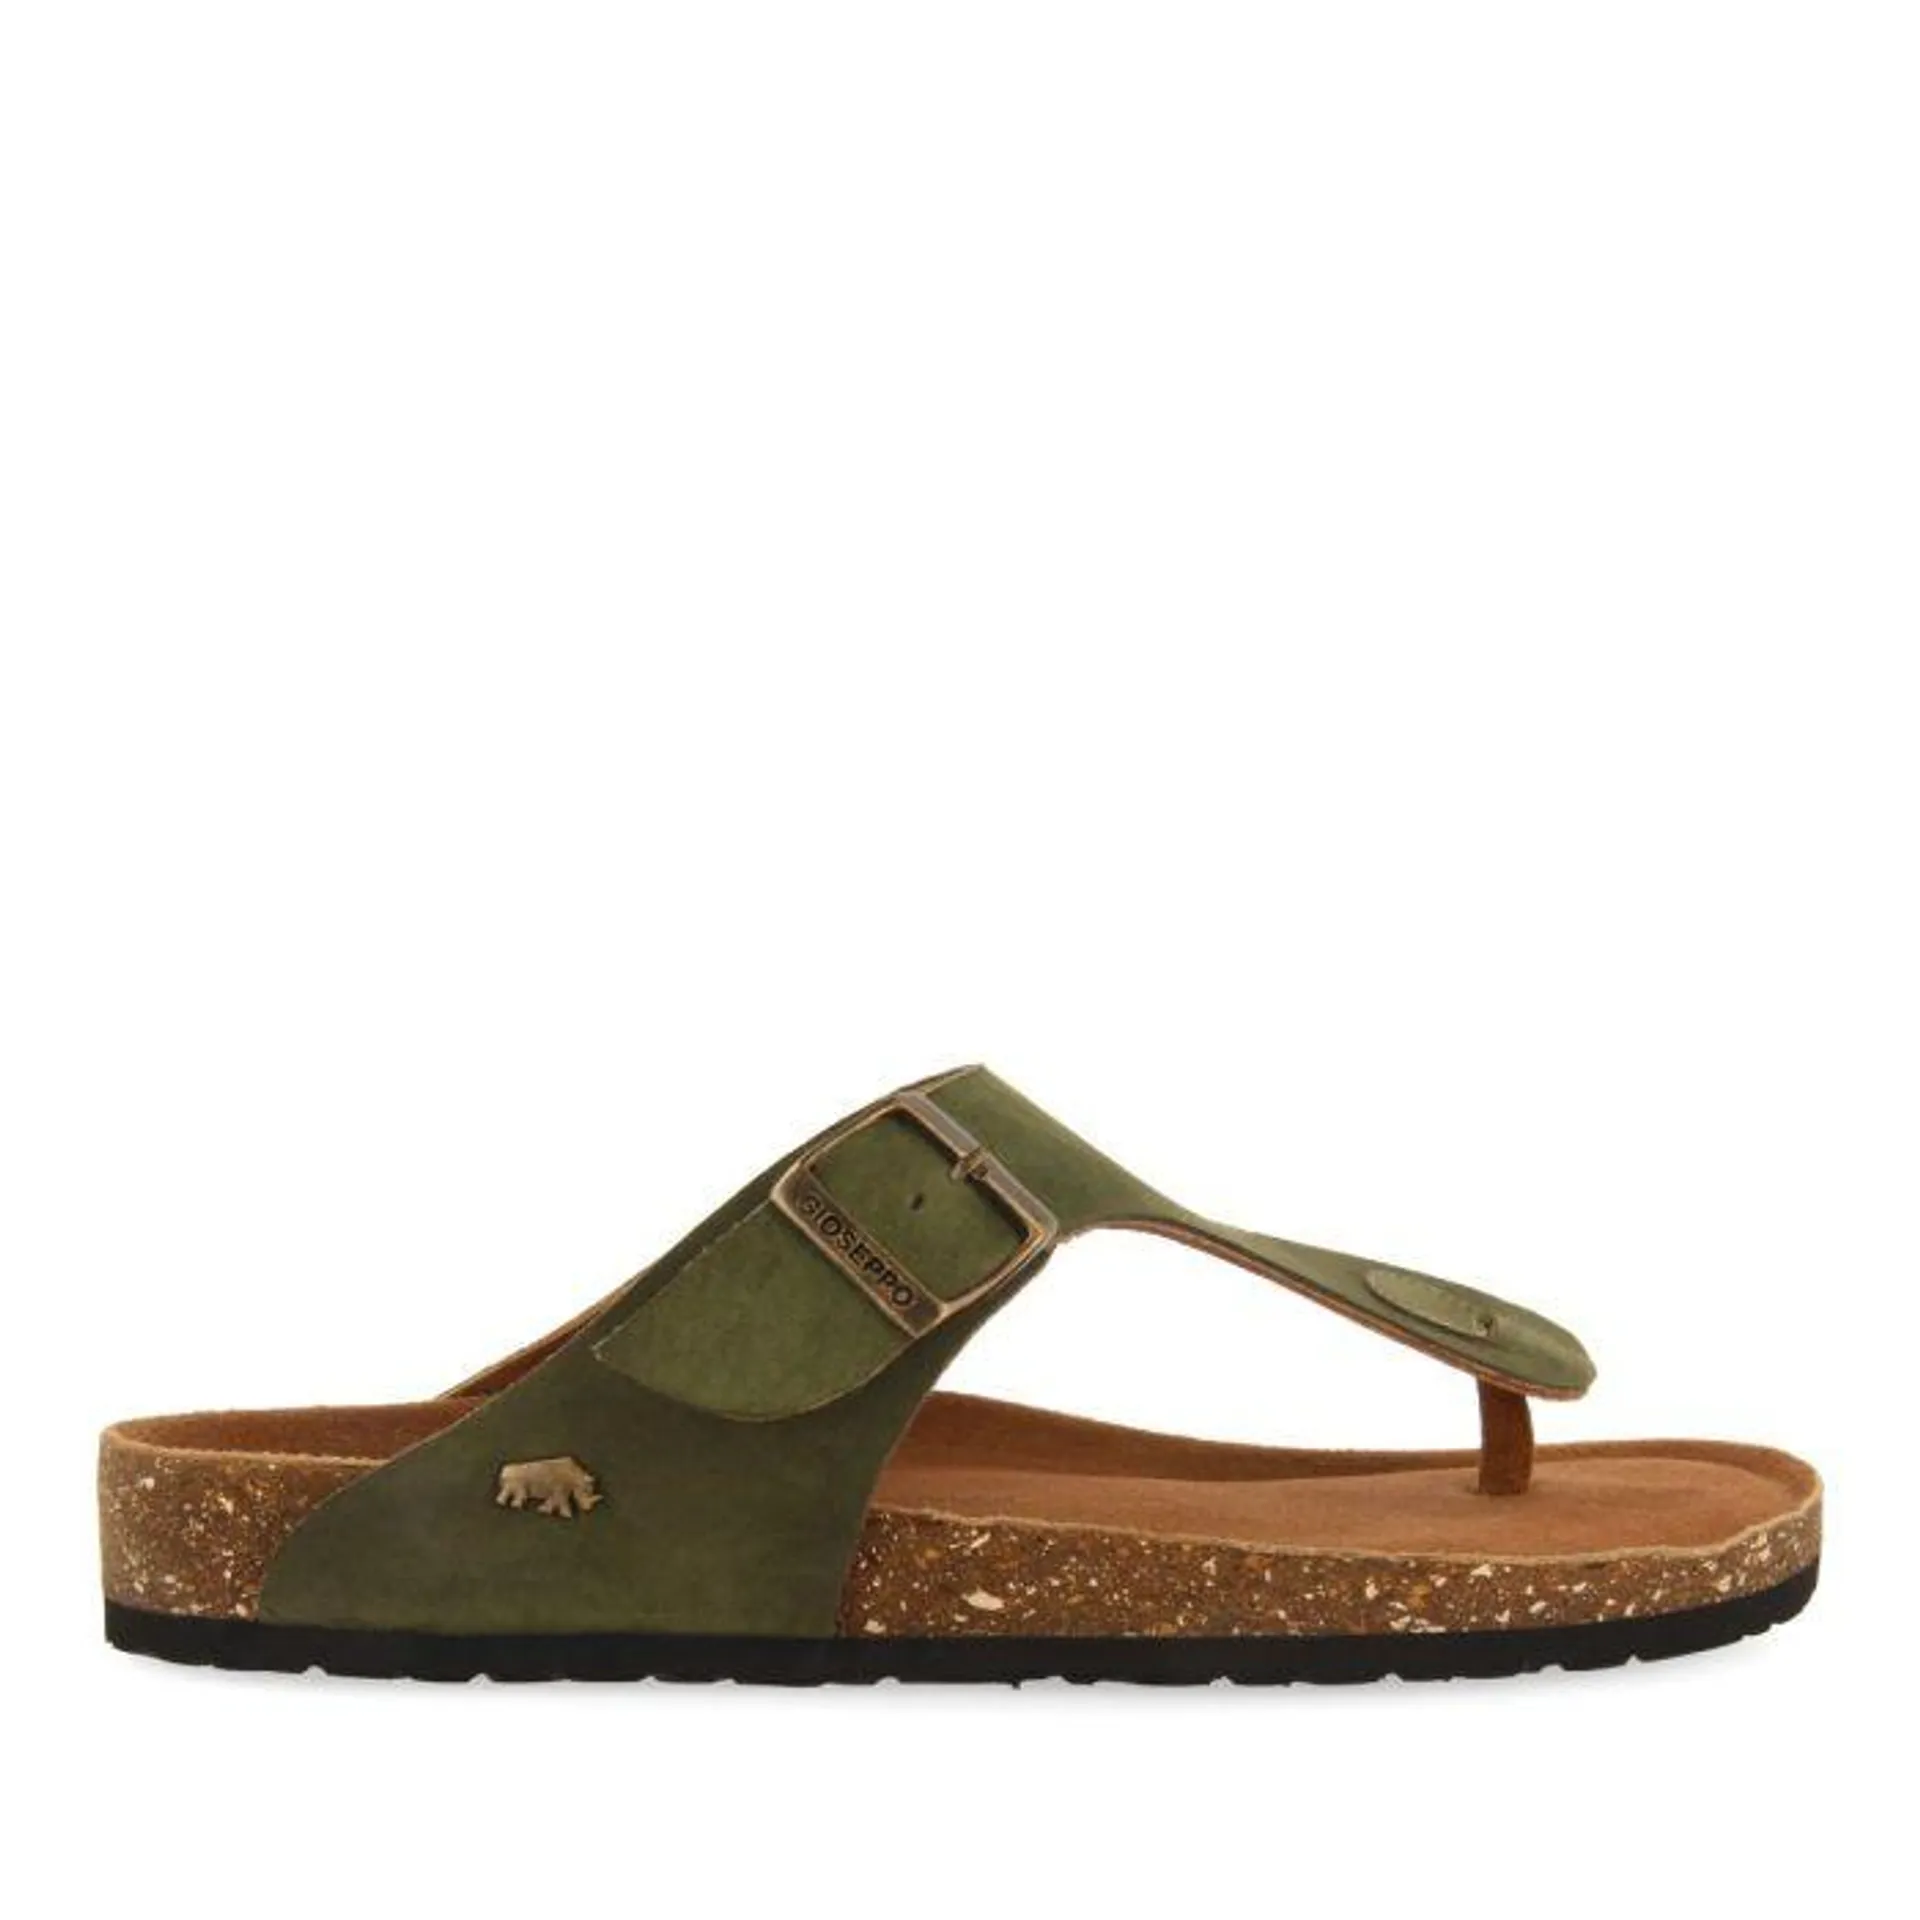 KHAKI LEATHER GREEK STYLE SANDALS WITH BIO SOLE FOR MEN RUSKIN